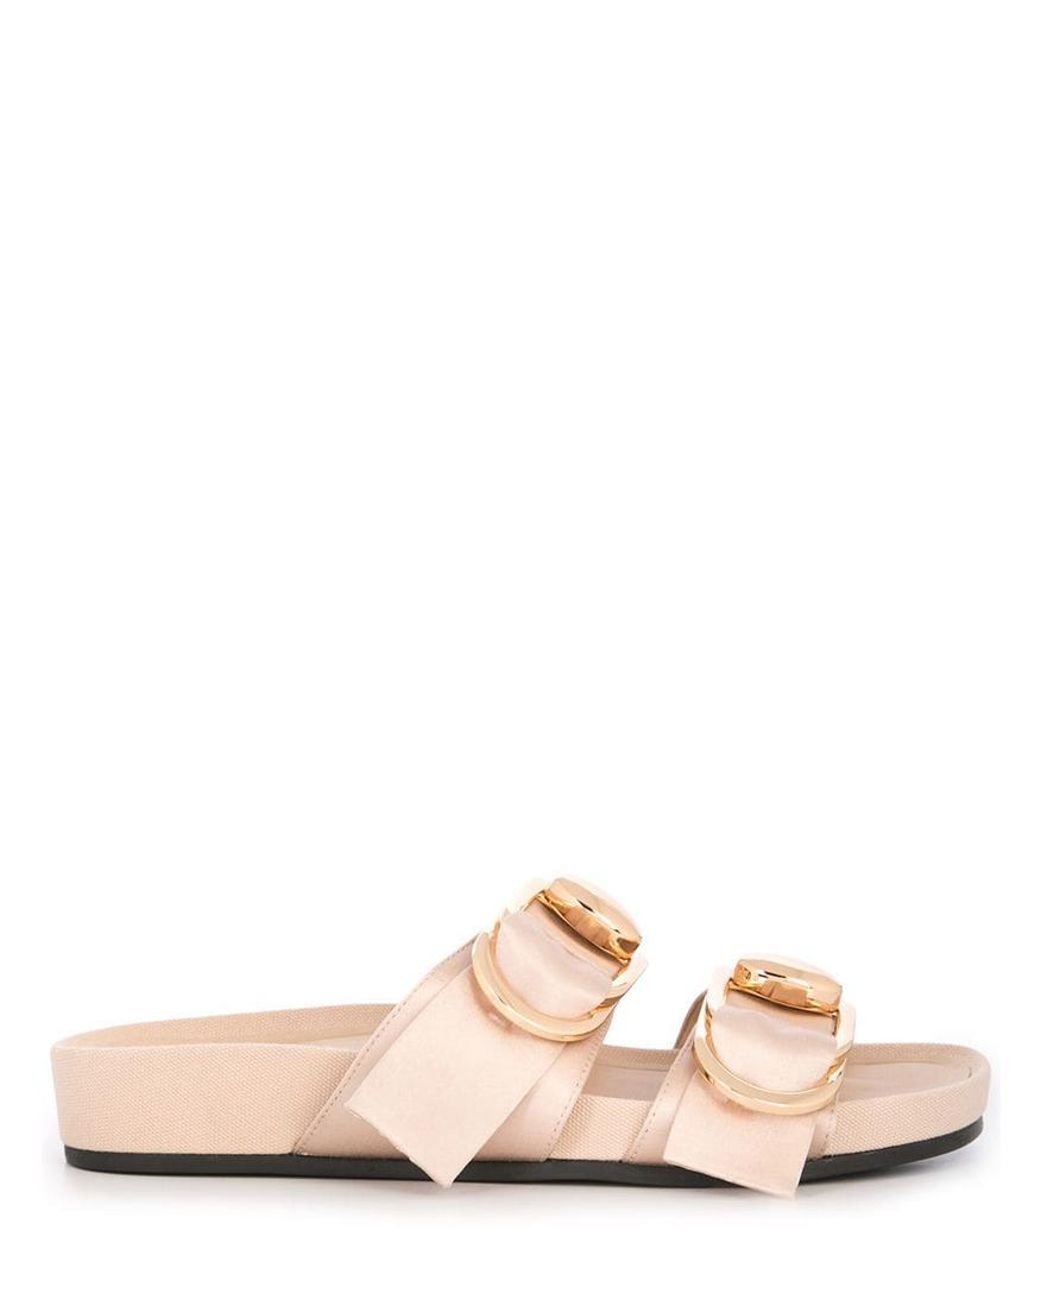 Stella Luna Nude Double Ring Slide in Natural | Lyst